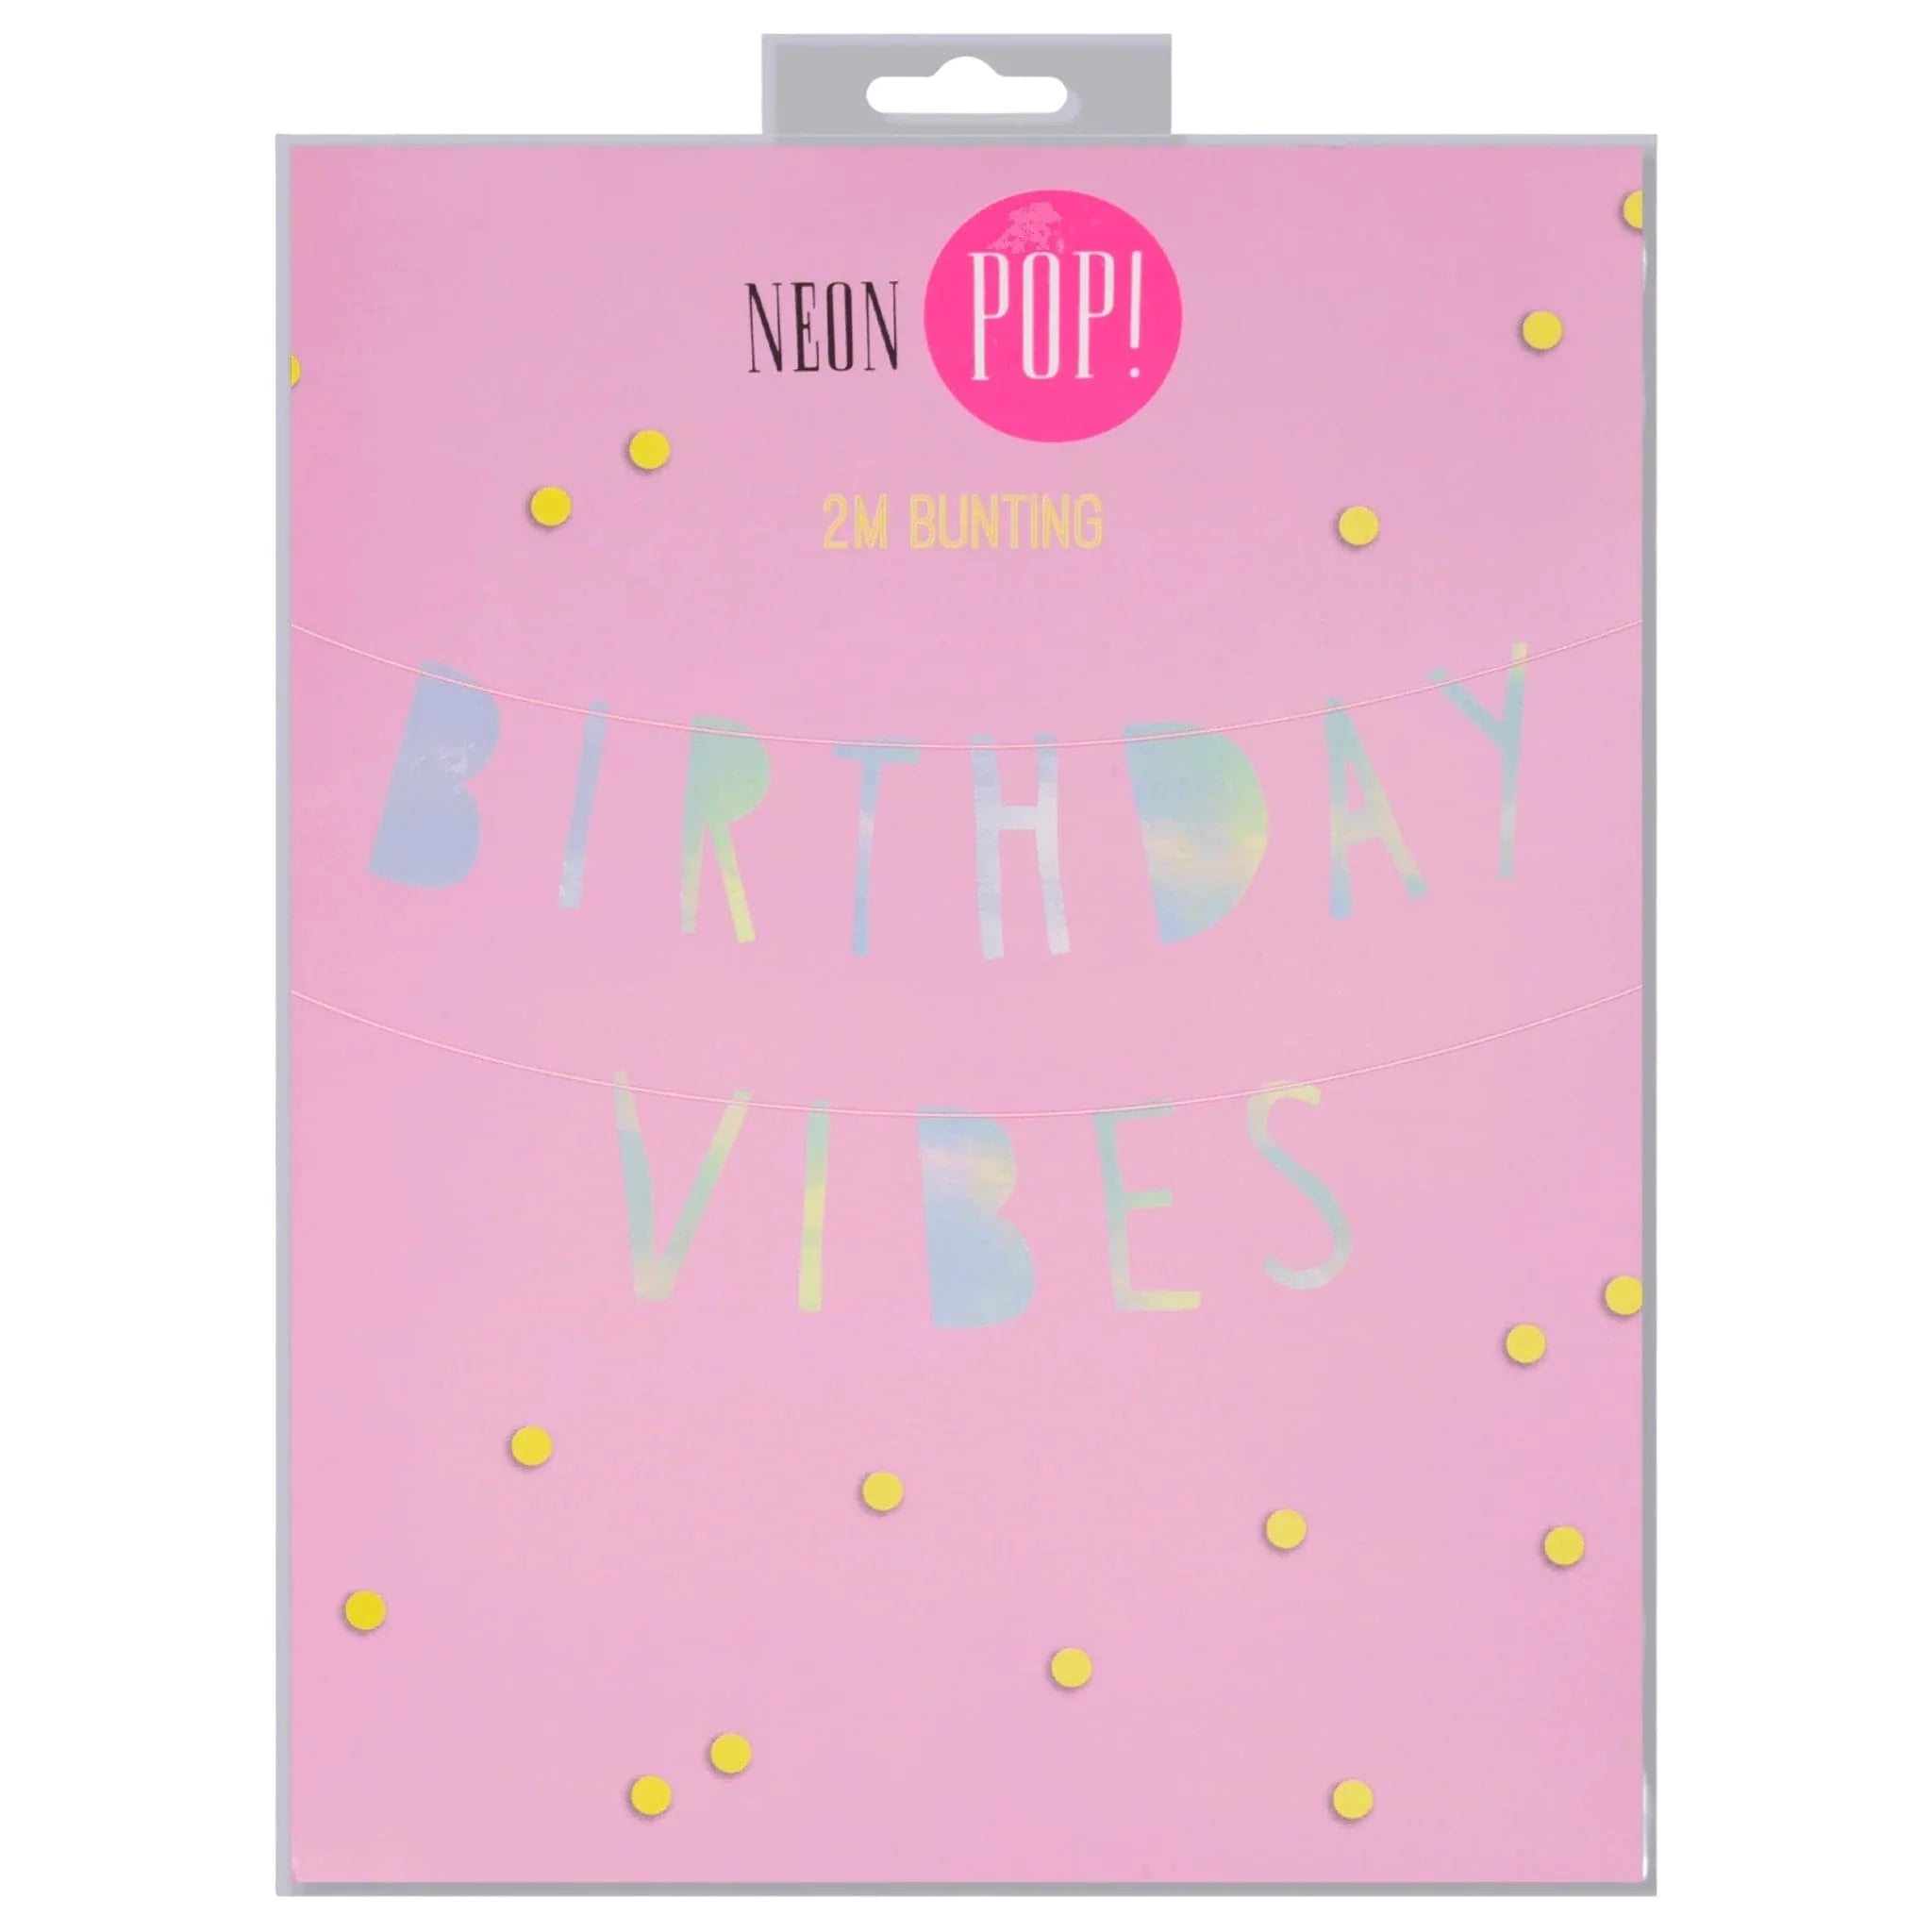 Neon Pop Bunting - 'Birthday Vibes' - Kids Party Craft